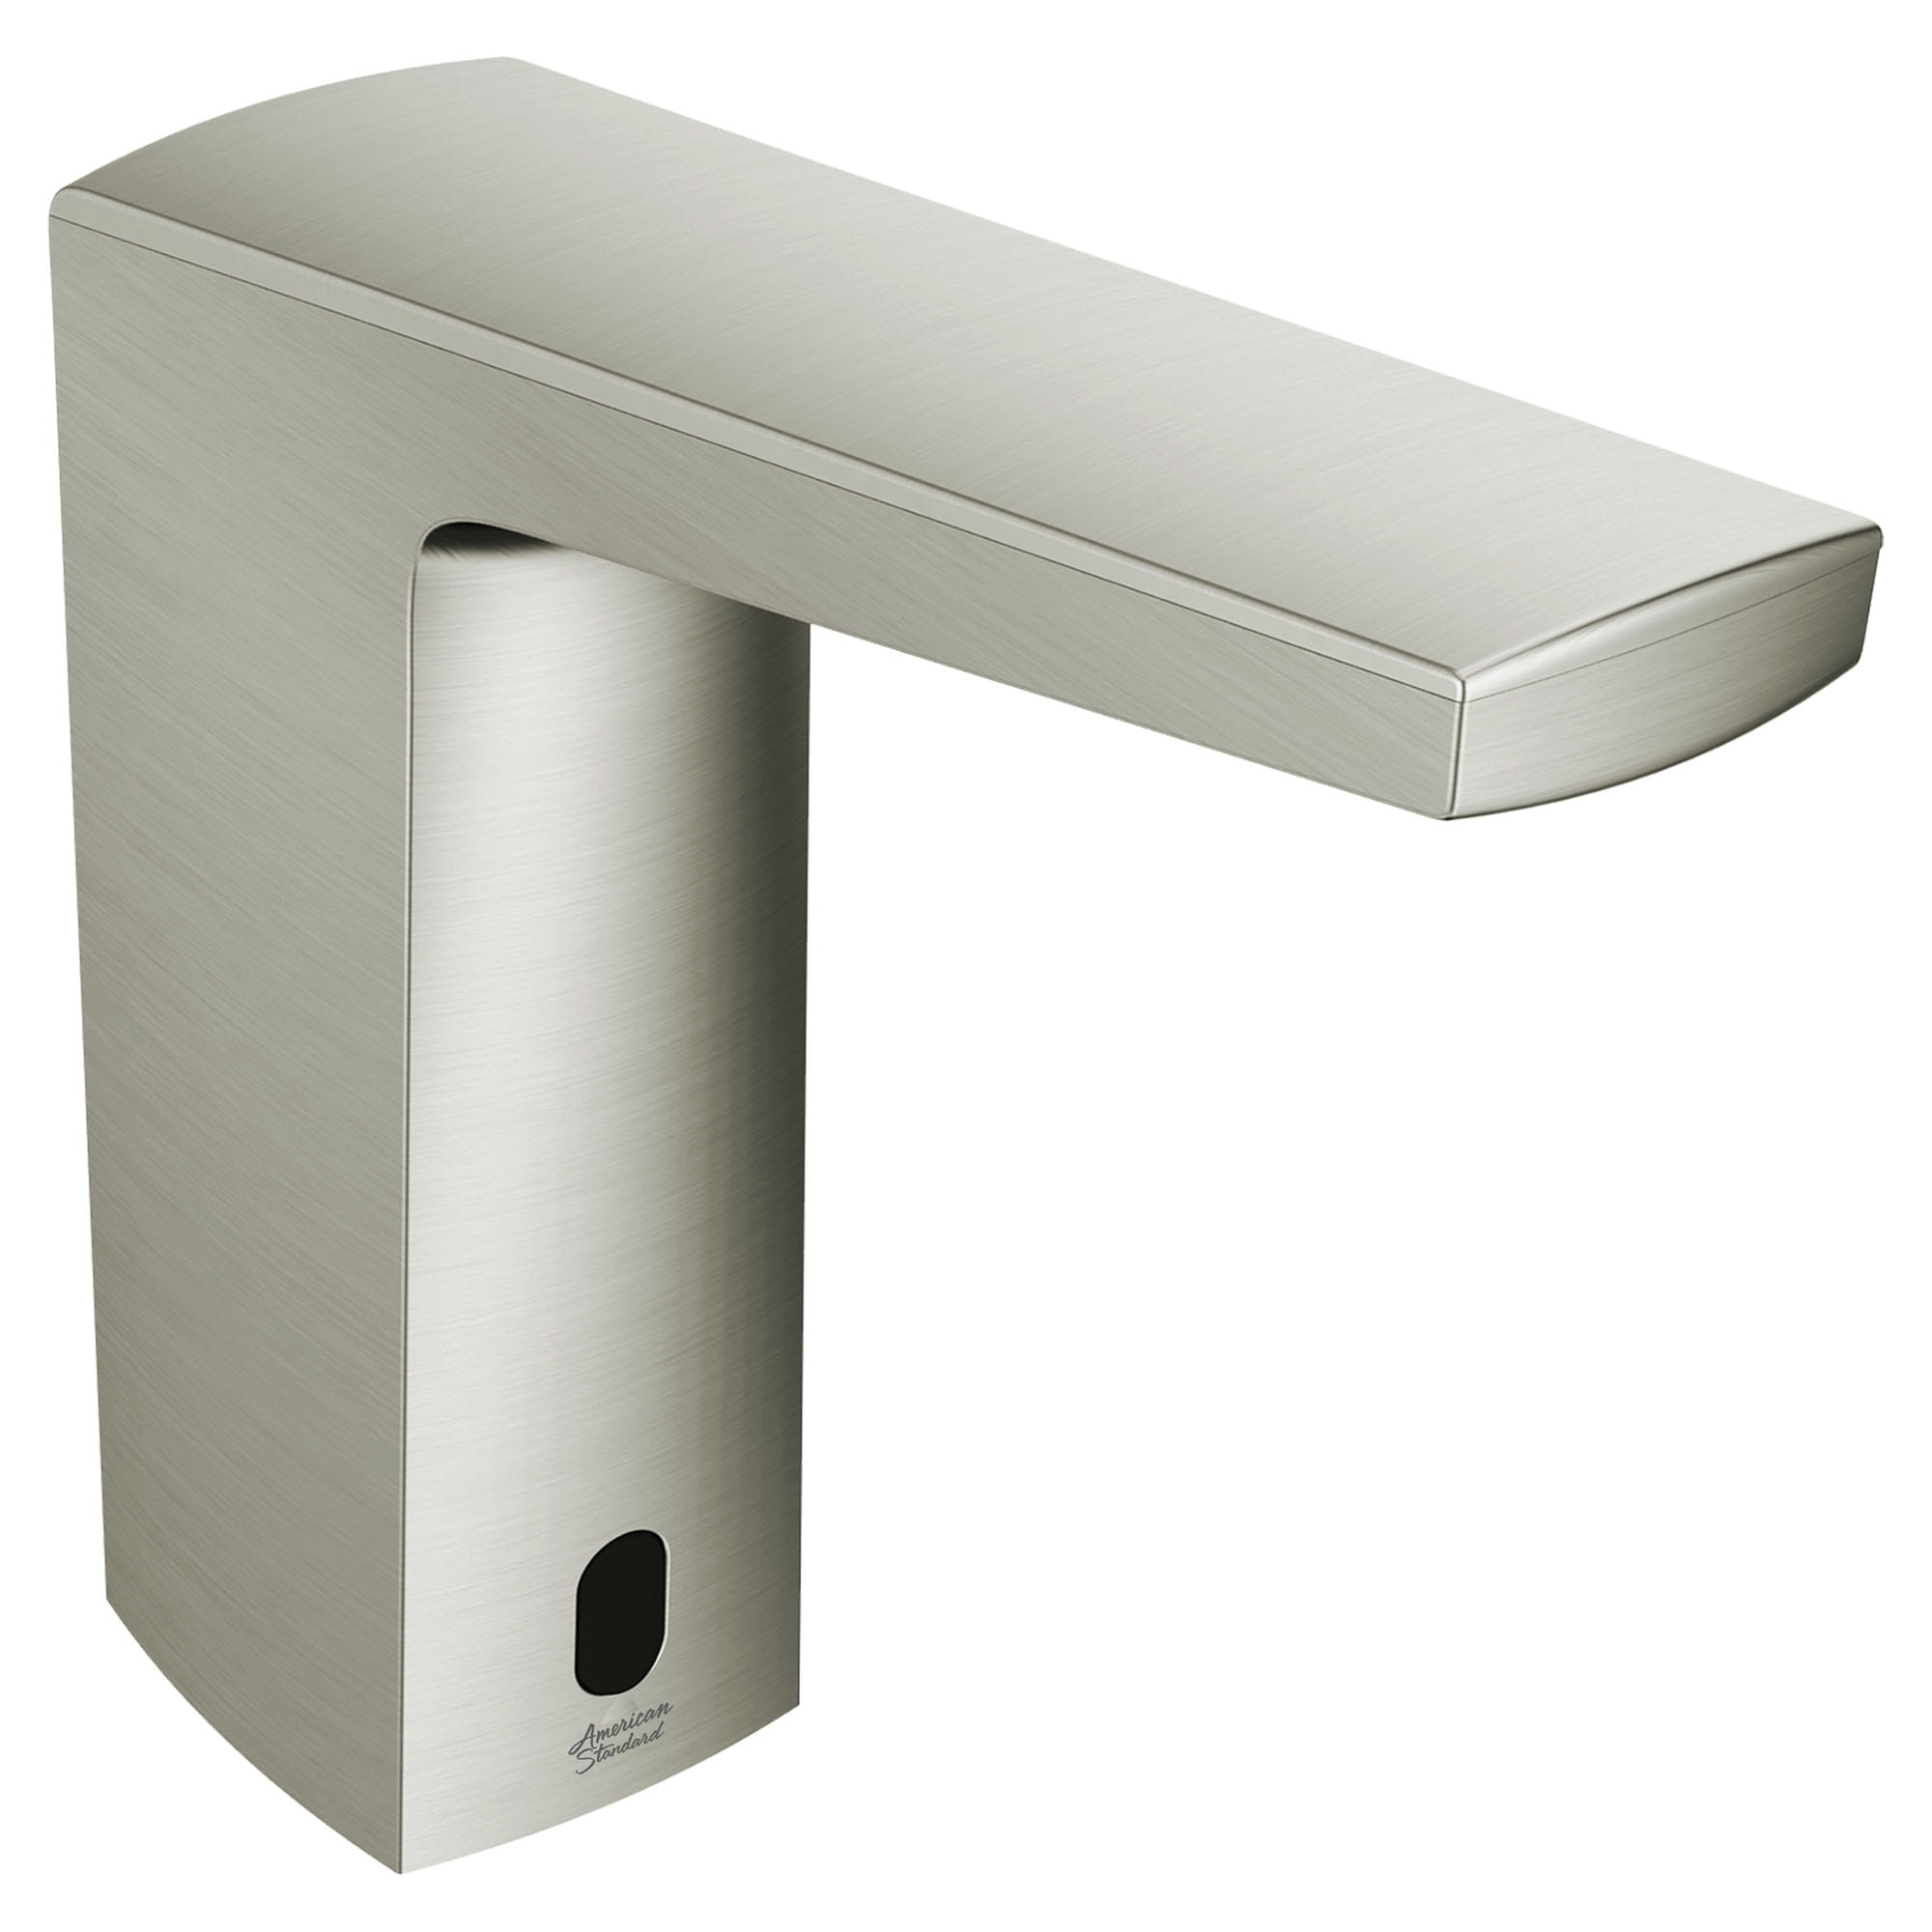 Paradigm Selectronic Touchless Faucet Battery Powered With SmarTherm Safety Shut Off  Plus  ADM 05 gpm 19 Lpm   BRUSHED NICKEL